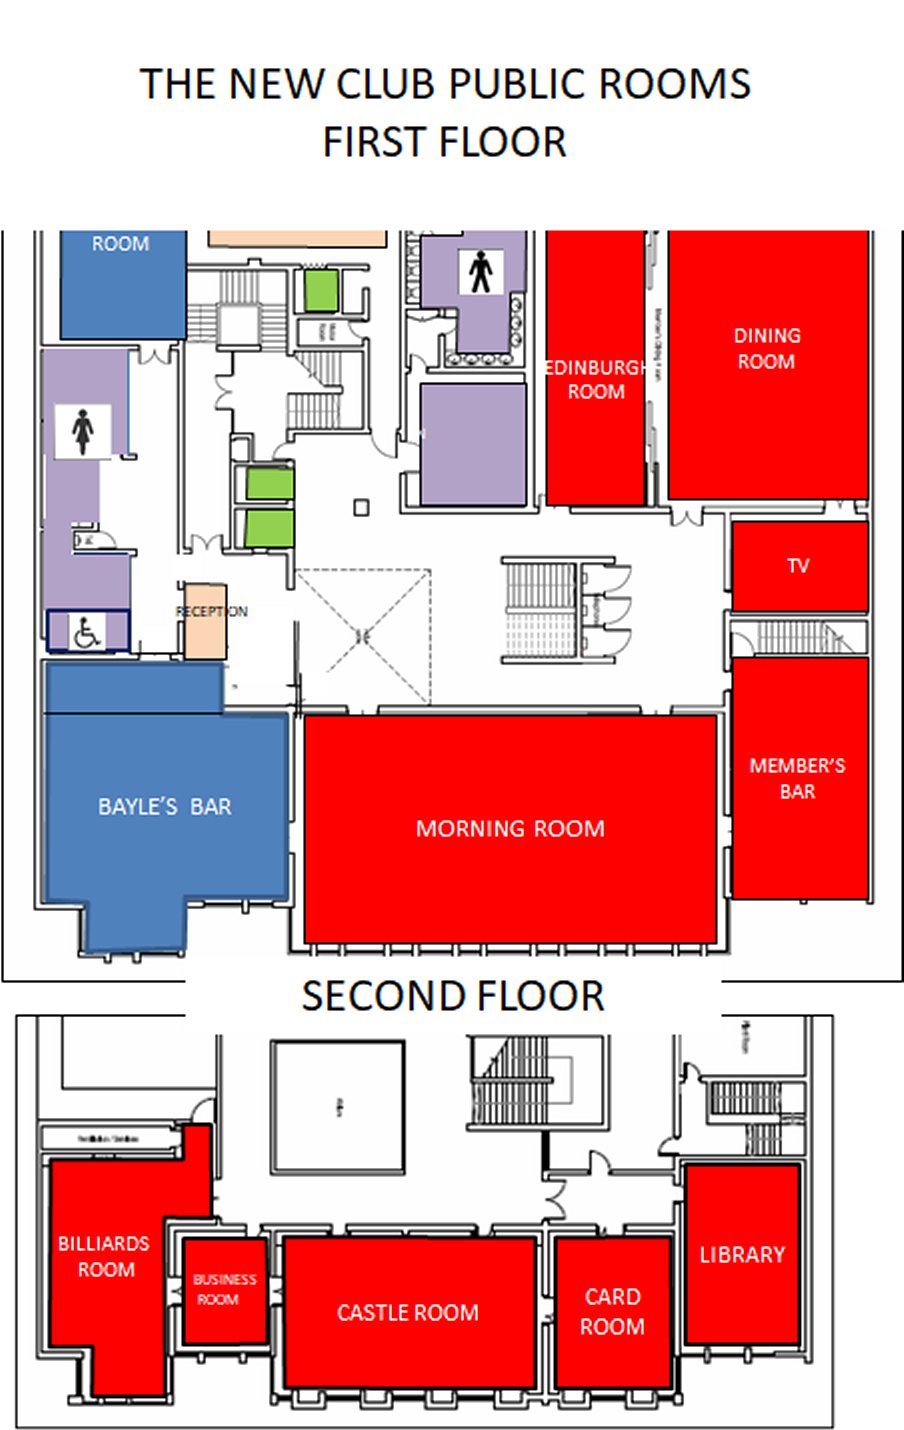 New Club layout first and second floor